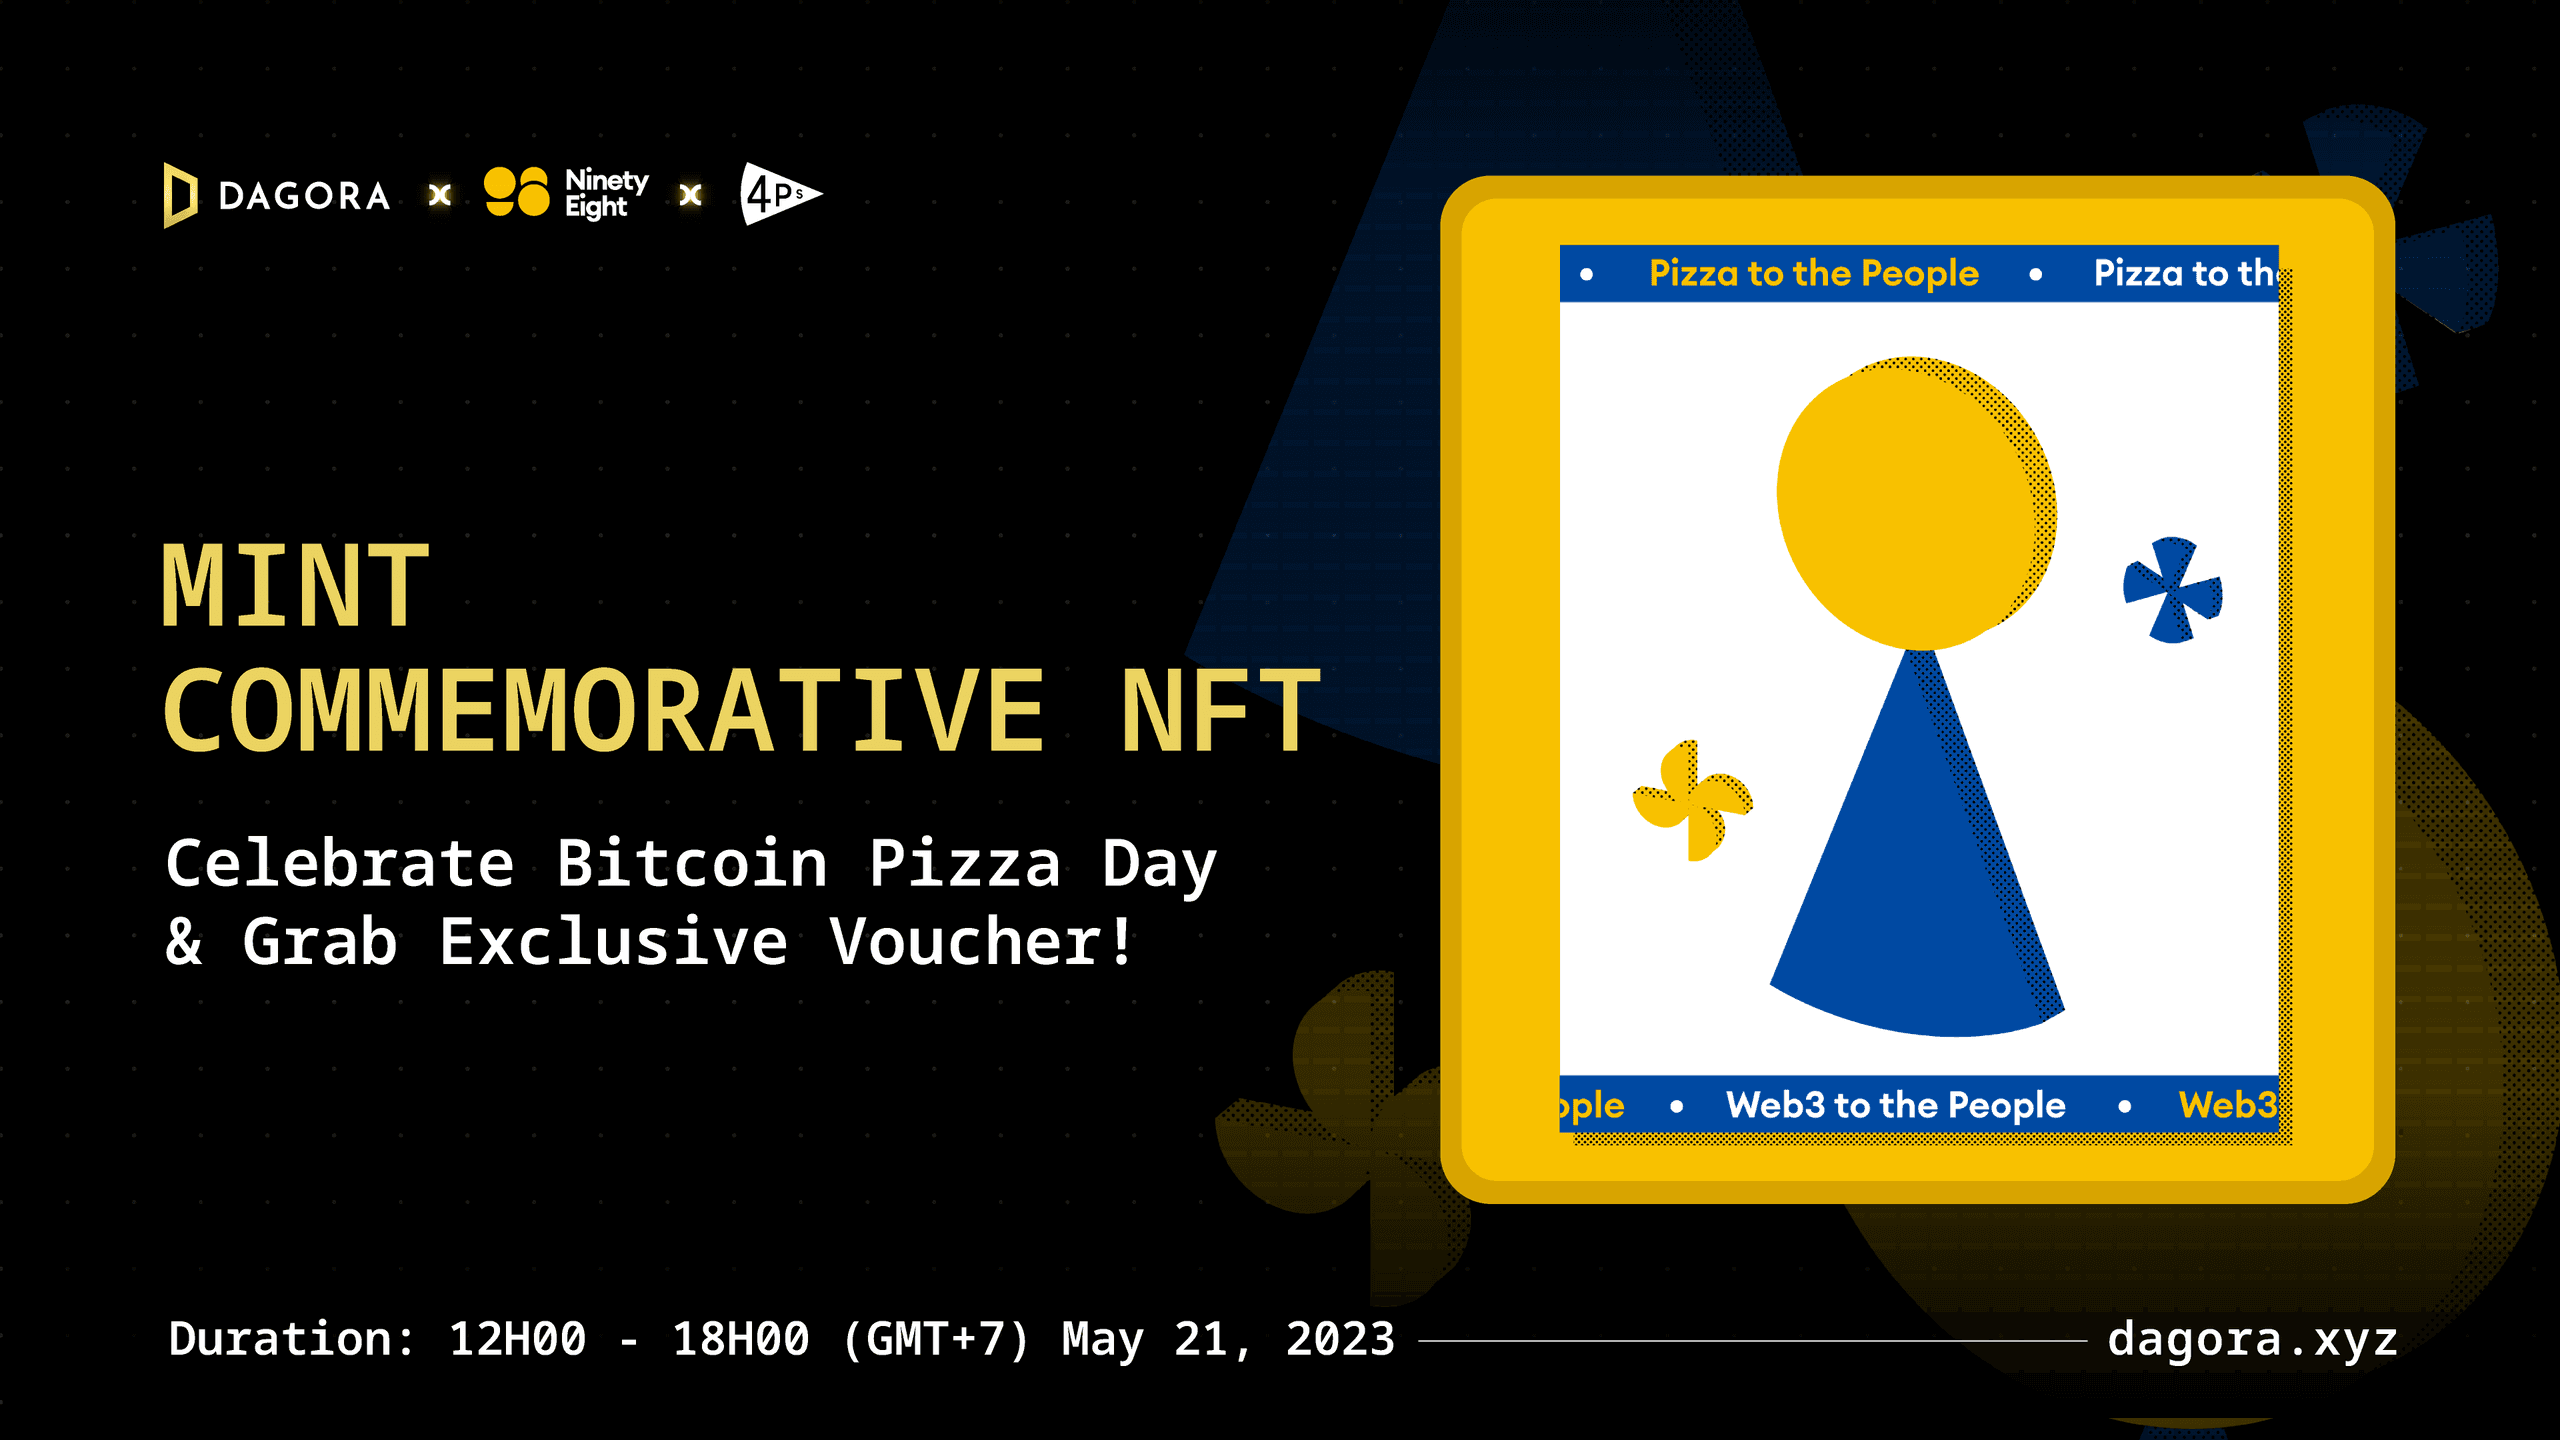 Slicing Up Bitcoin Pizza Day With The Exclusive Ninety Eight x Pizza 4P’s NFT Collection!